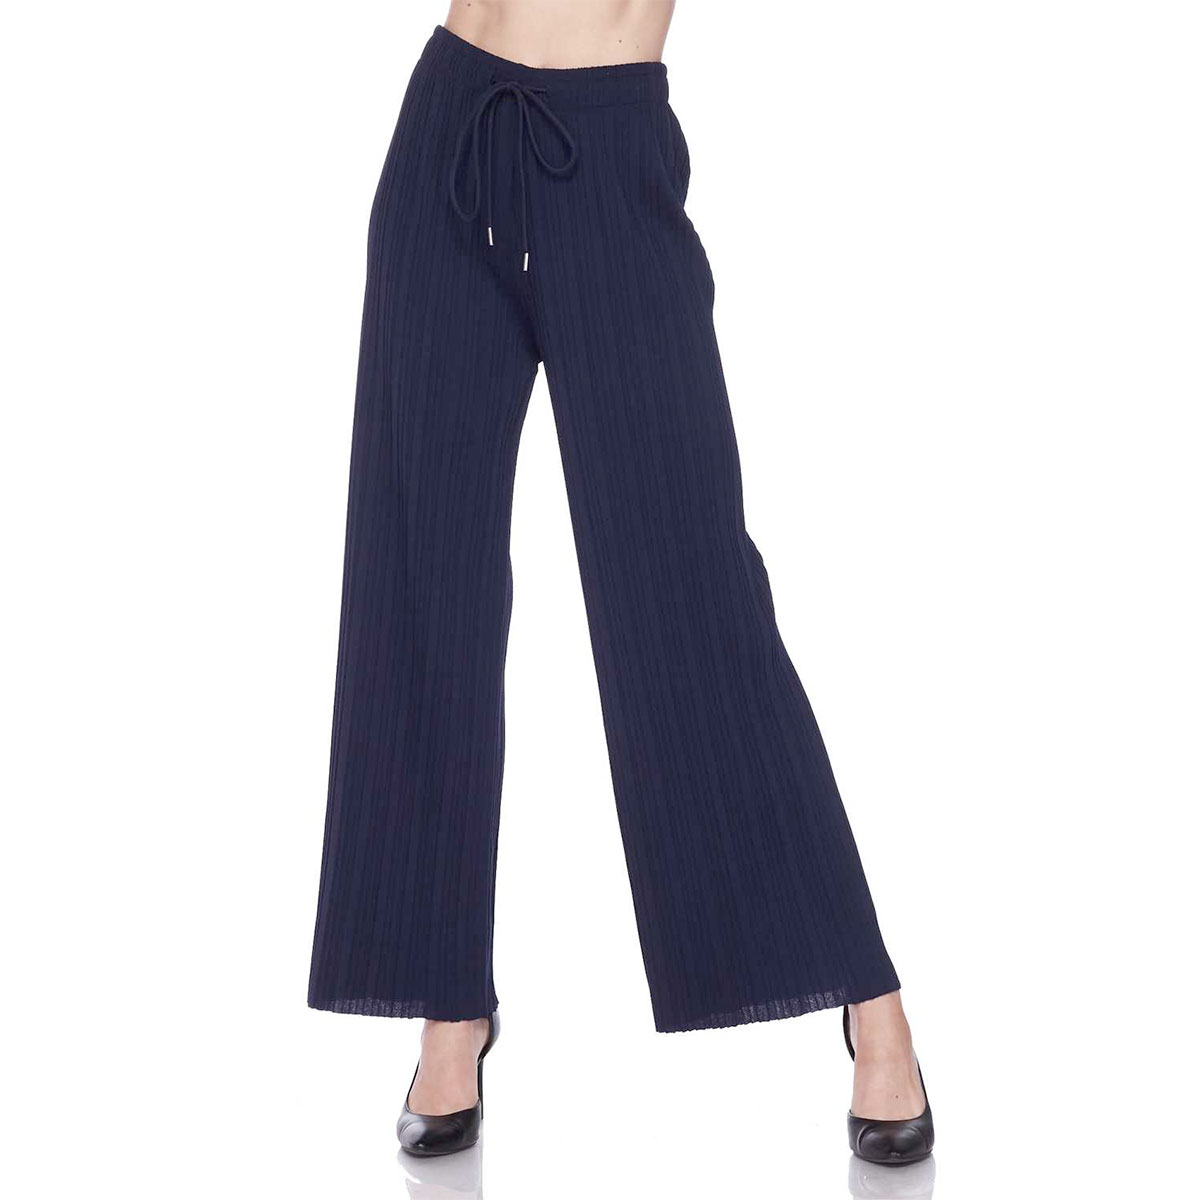 Navy<br>
Stretch Twill Pleated Wide Leg Pants